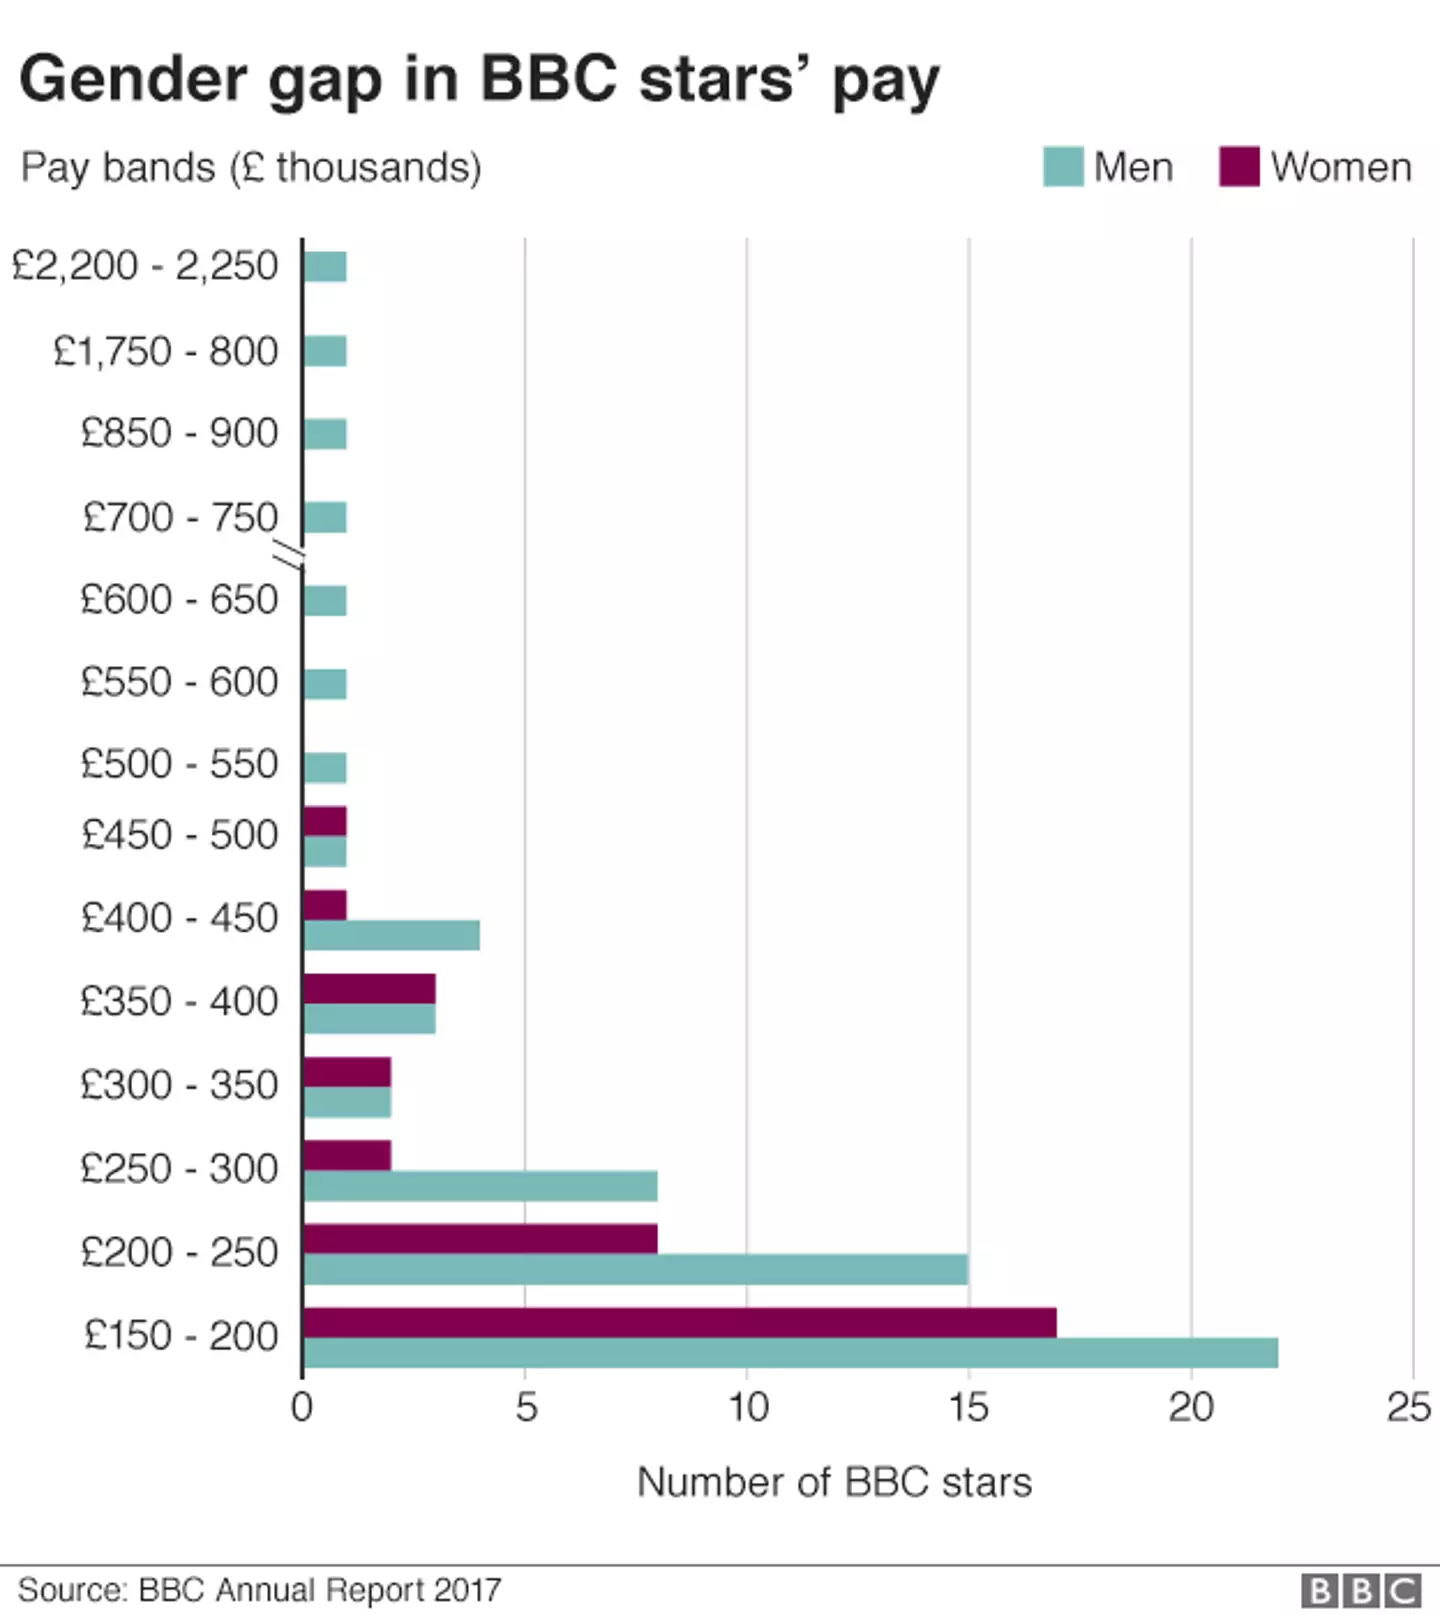 The gender pay gap at the BBC was exposed back in 2017.